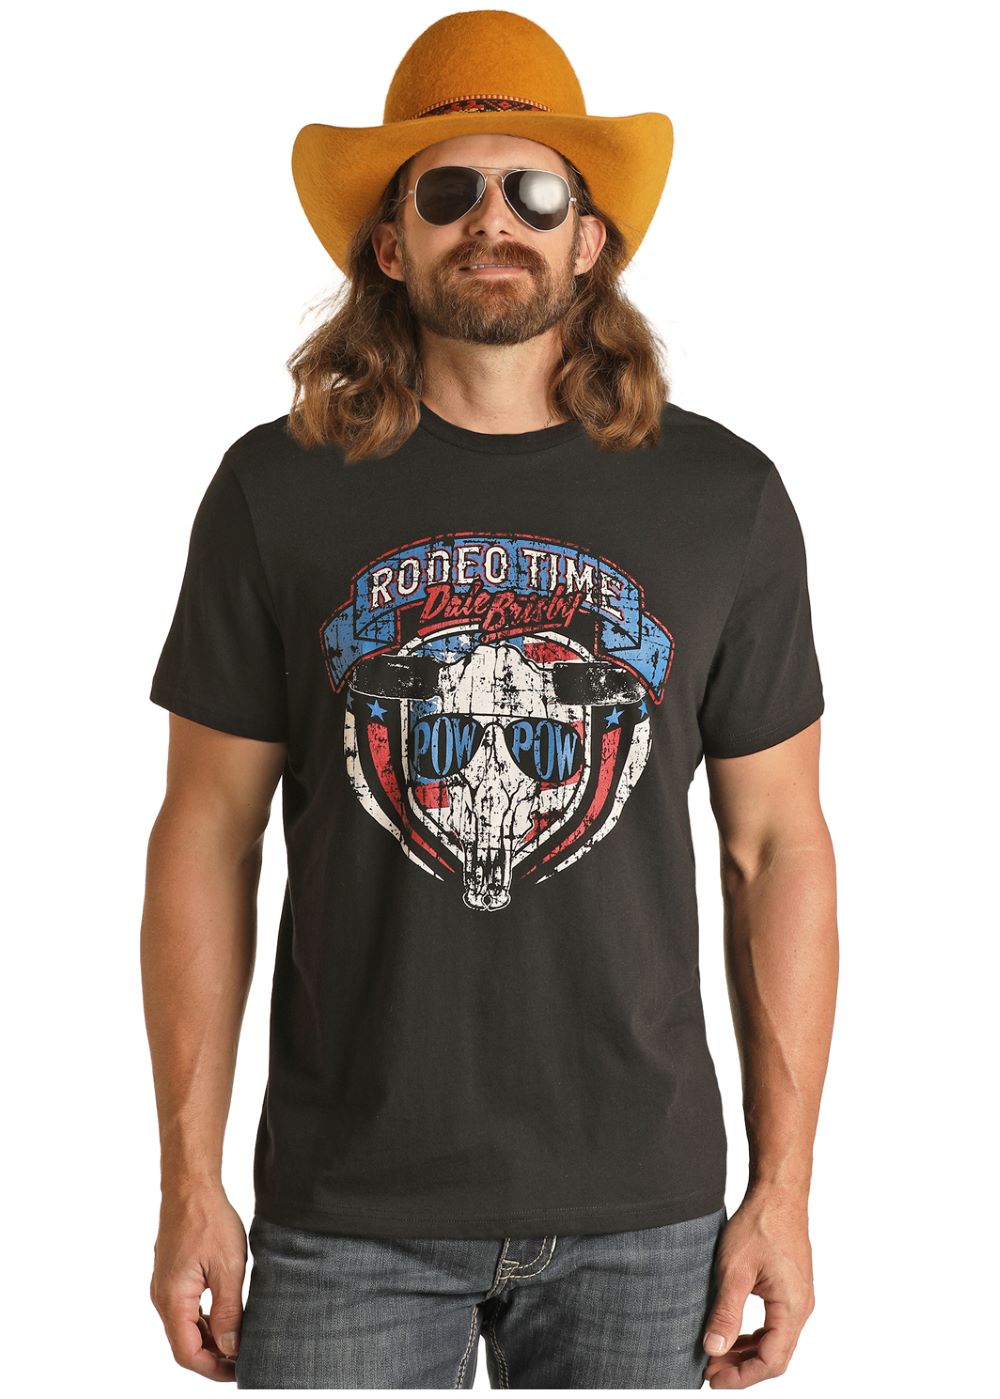 'Panhandle-Rock & Roll' Unisex Dale Graphic Tee - Black